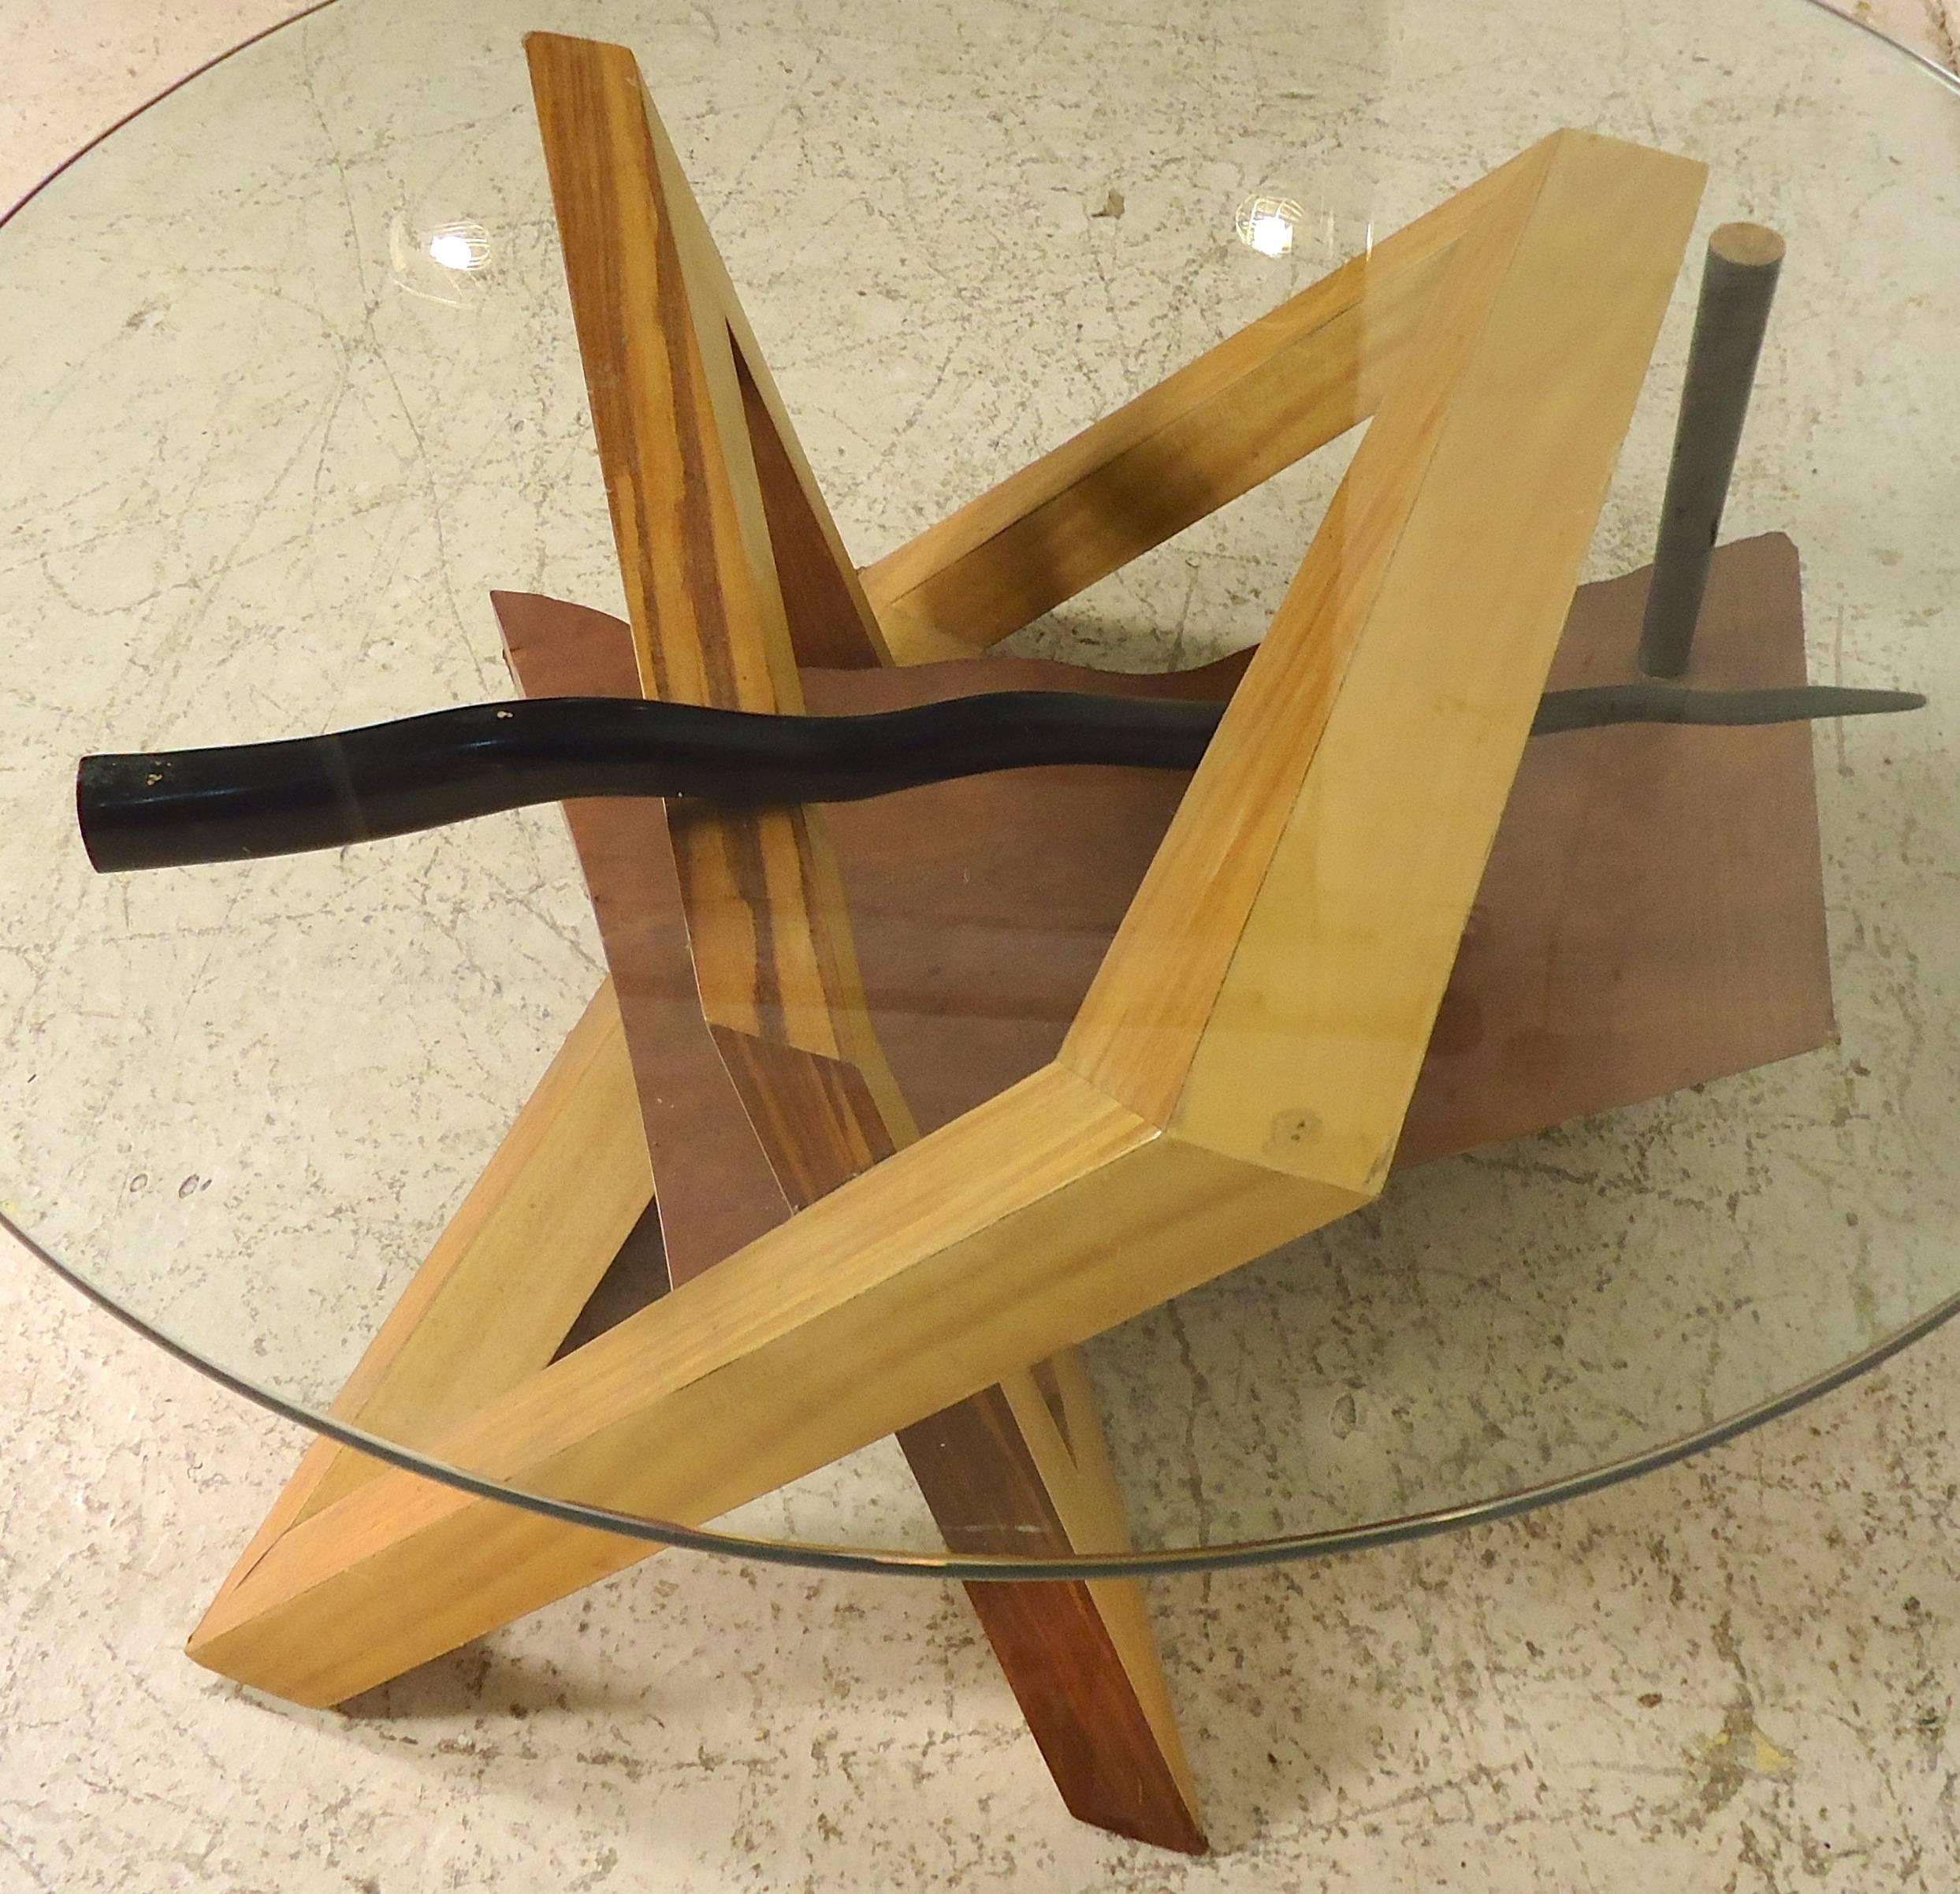 Unusual wood base table with round glass top. The sculpted wood base zig-zags to make sharp angles, and has additional black forms that act as a leg and glass rest. Contemporary style that works well with any modern or Mid-Century motif.

(Please